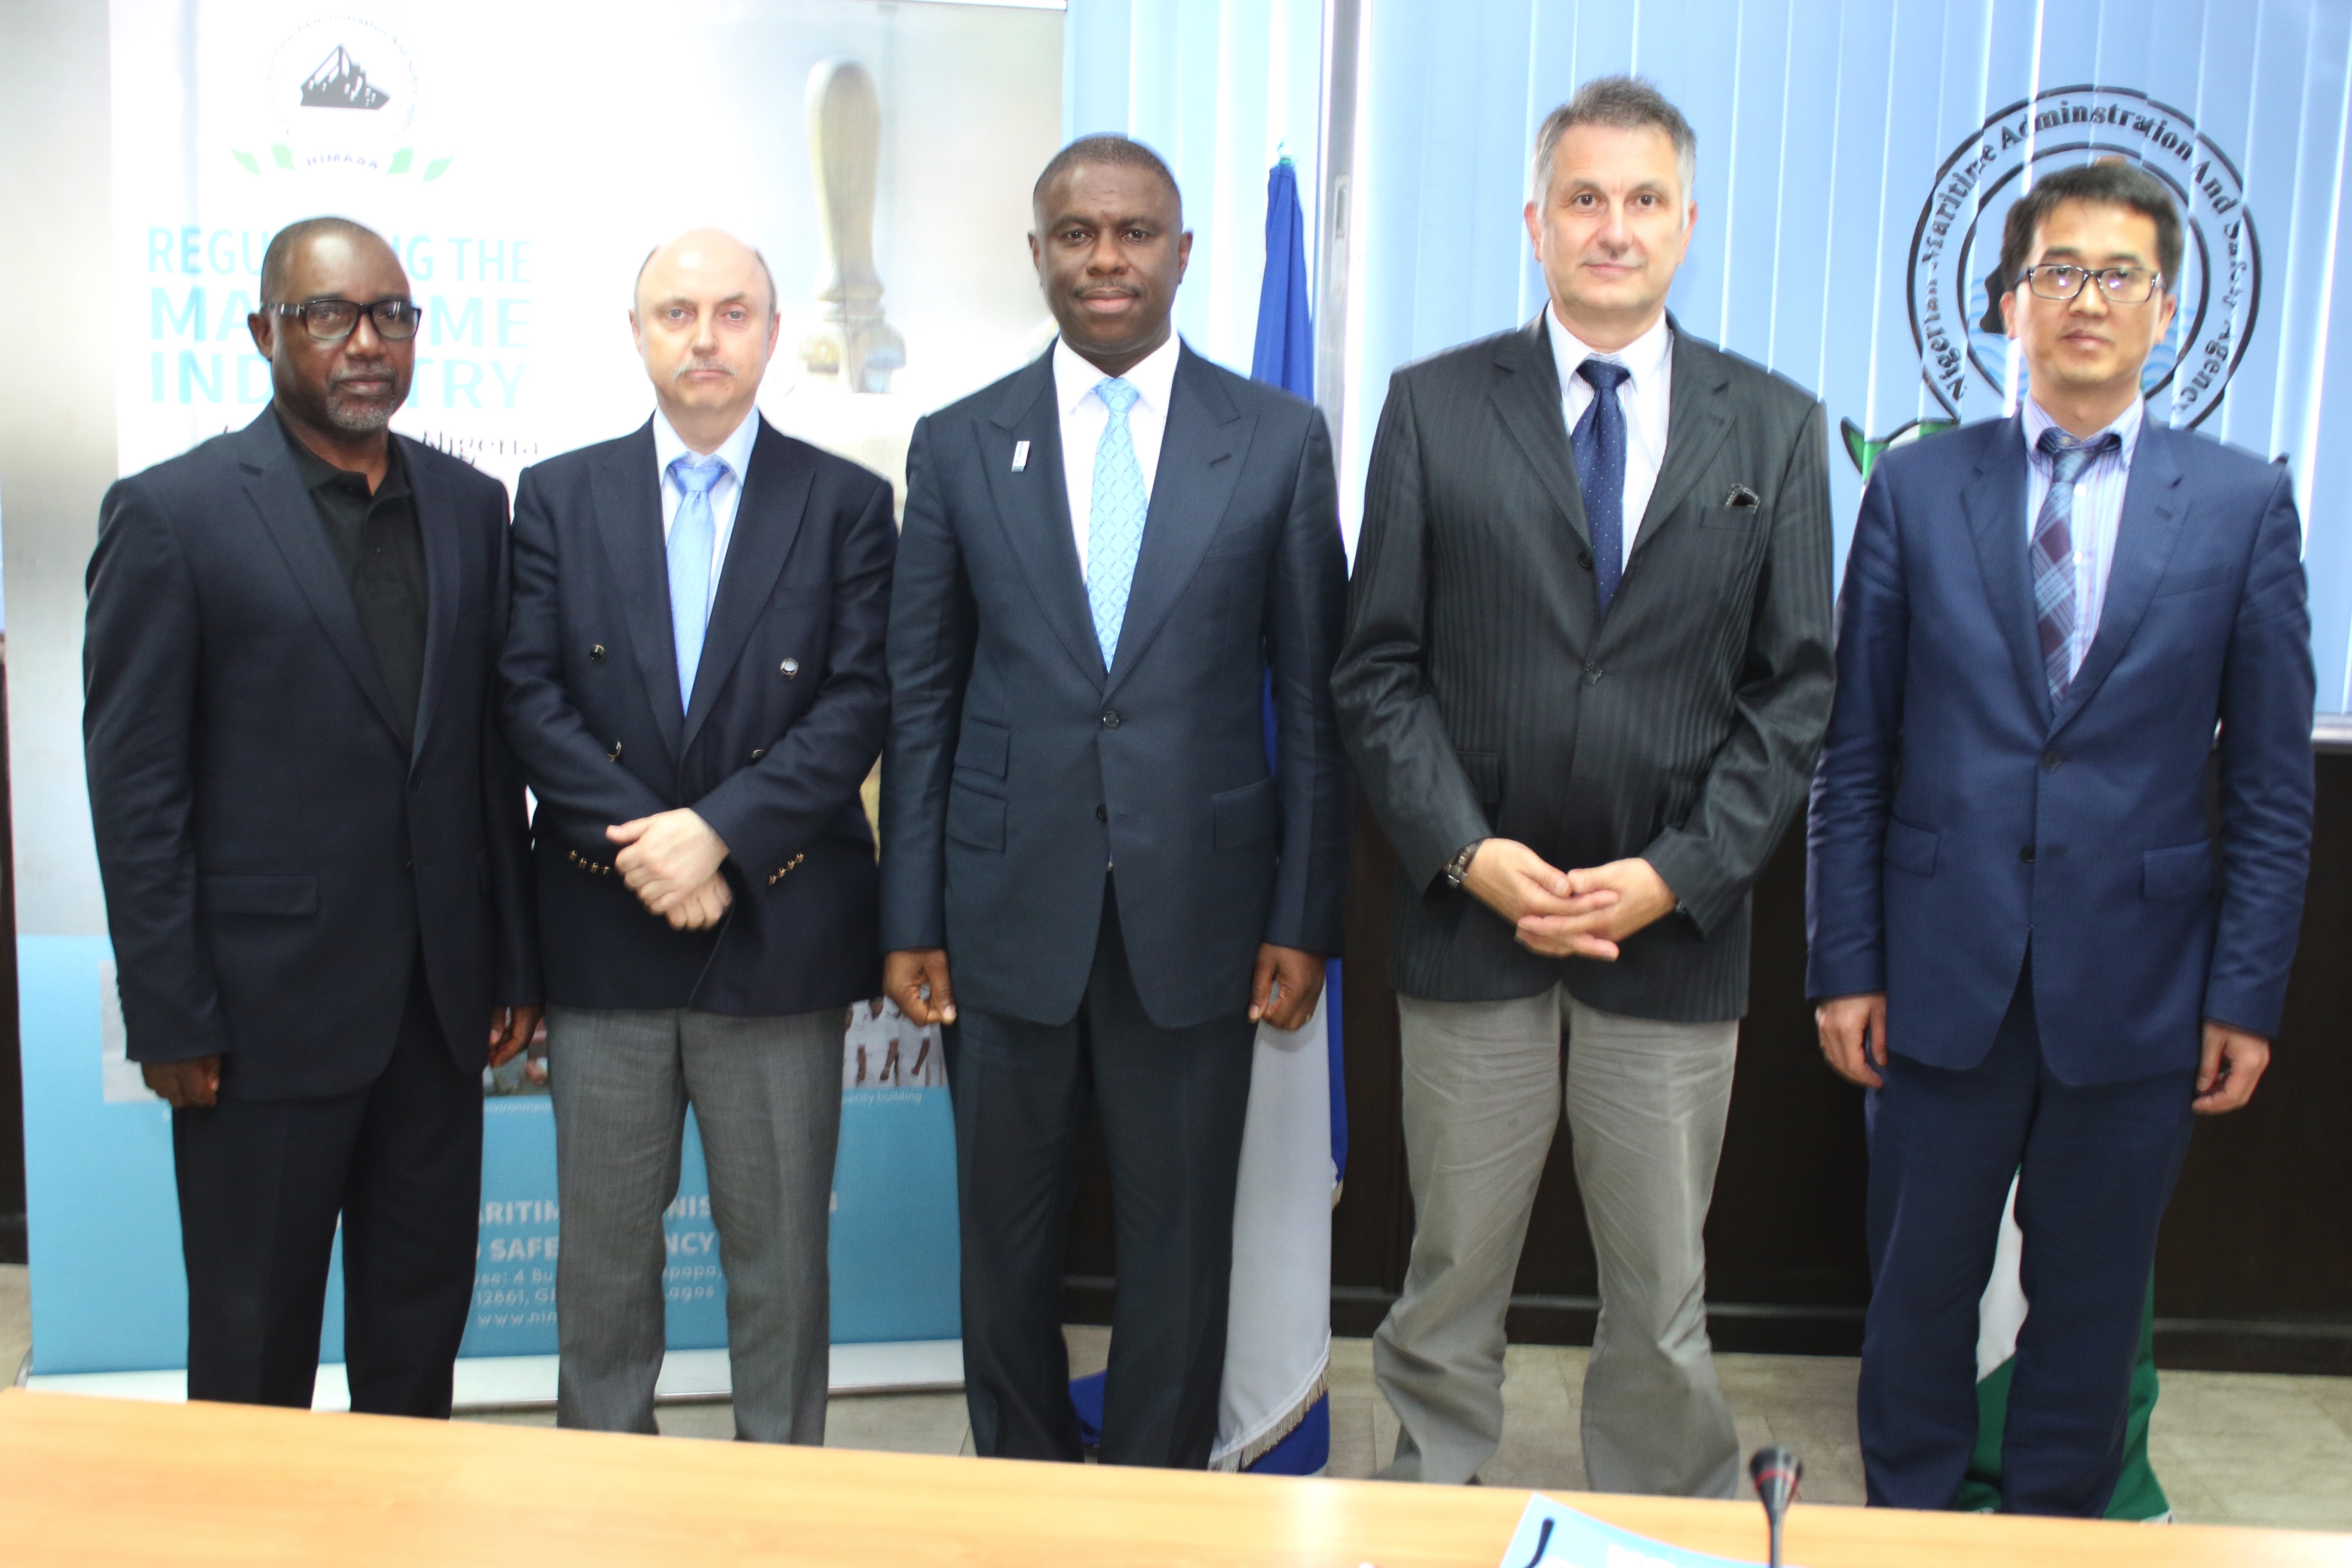 L-R: Nigeria's Alternate Permanent Representative to IMO, Dikko Bala; Member, International Maritime Organisation Member State Audit Scheme (IMSAS), Hakon Stohaug; Director General, Nigerian Maritime Administration and Safety Agency (NIMASA), Dr. Dakuku Peterside; Head of the IMSAS team to Nigeria, Captain Yalscin Cahit; and another member of the team, Wei Song during the submission of the preliminary audit report to NIMASA in Lagos. 